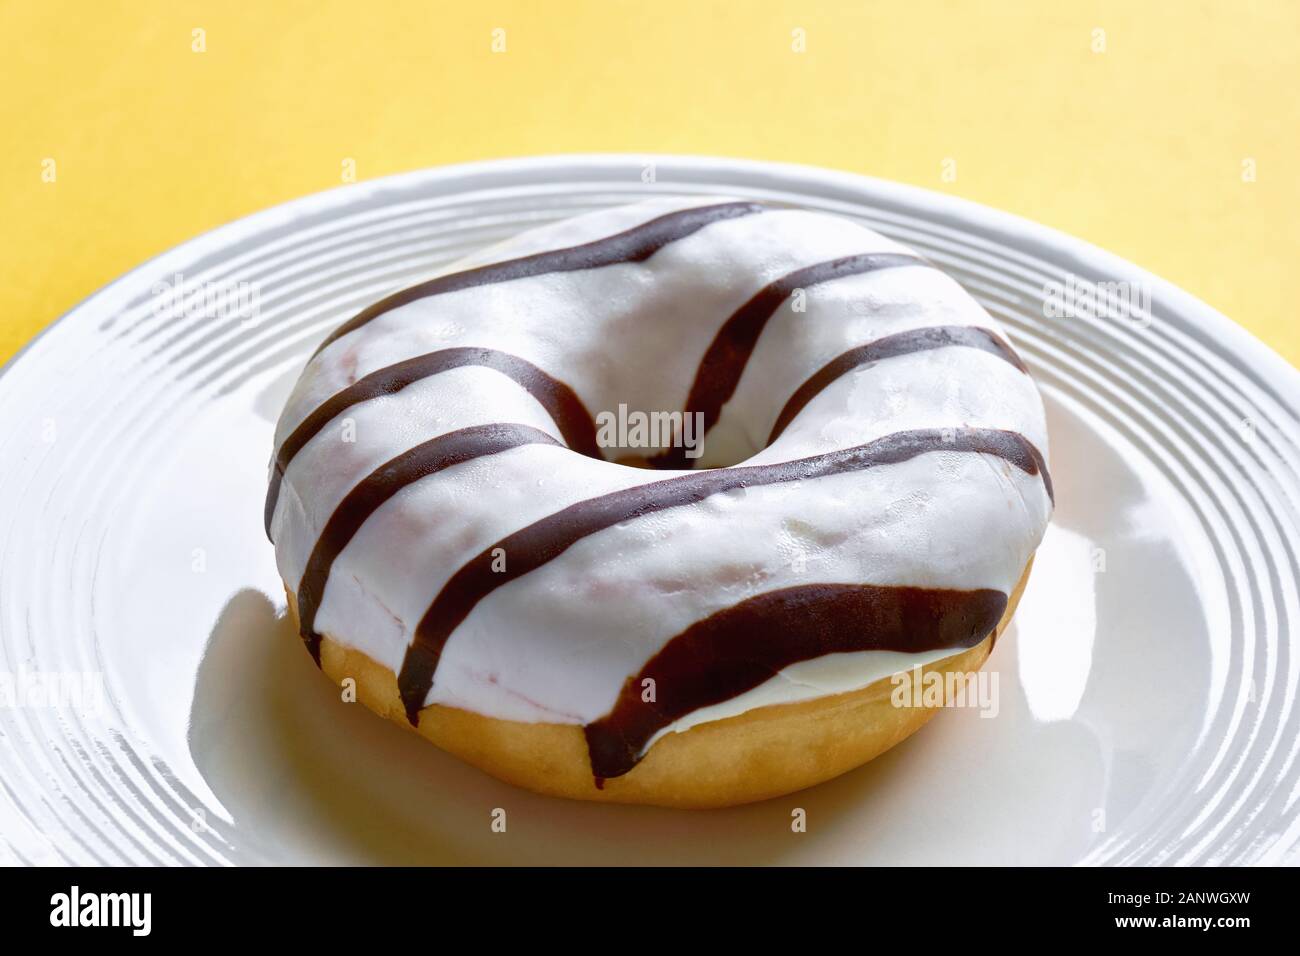 One single round donut with white ice glazing and stripes of dark brown chocolate on a shiny white plate against a yellow background Stock Photo